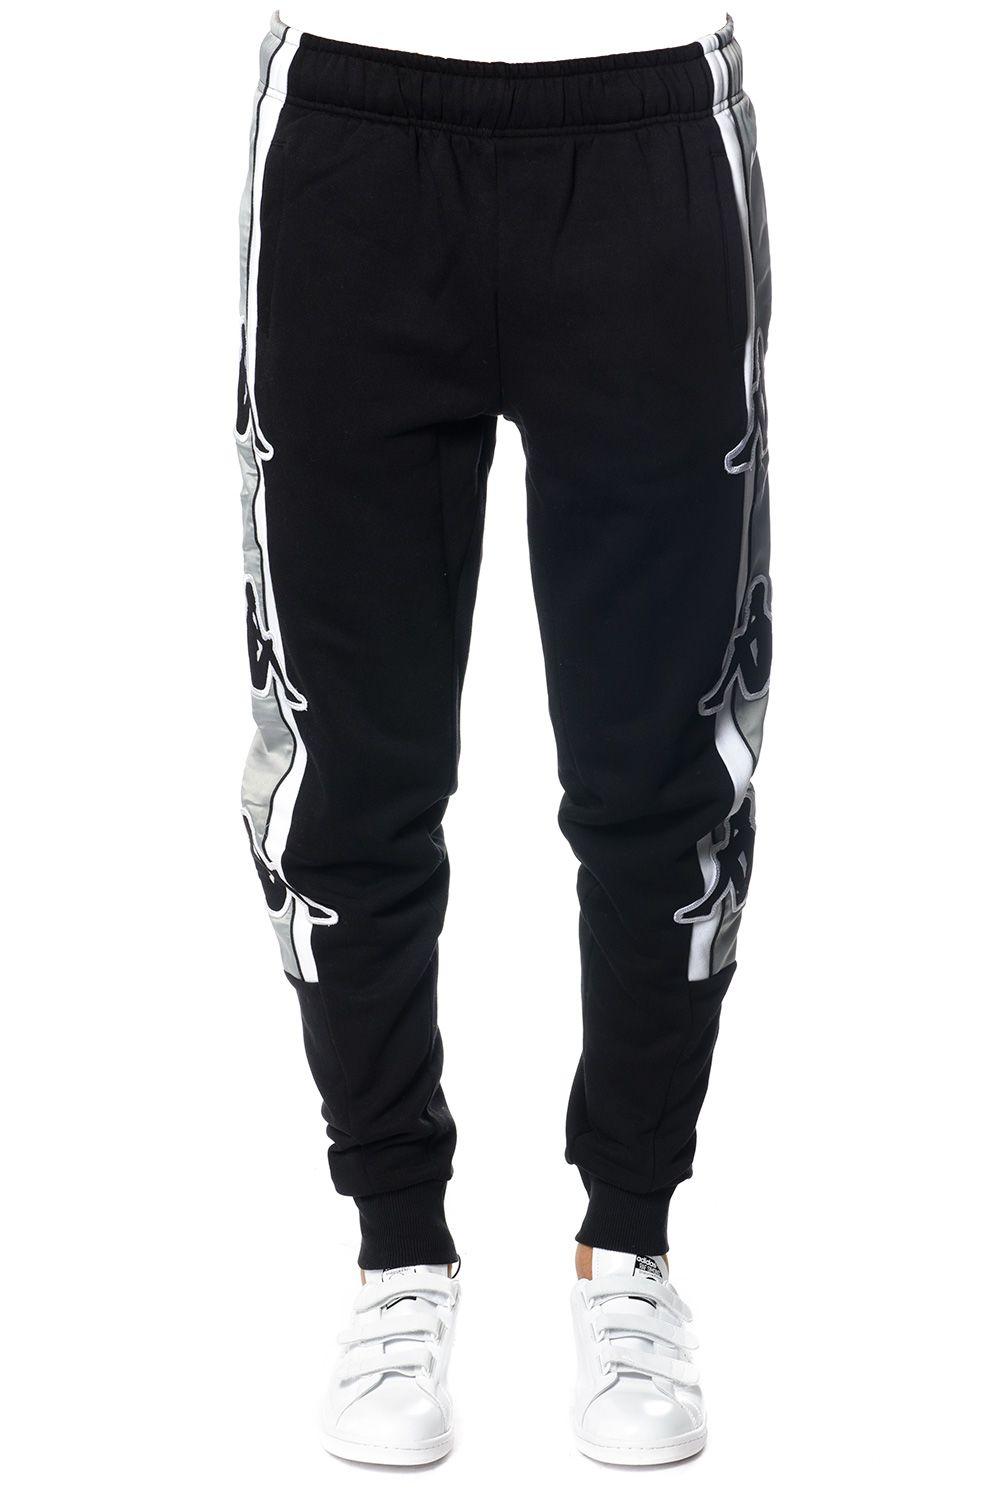 Kappa Jogging Pants With Side Striped And Logo In Black | ModeSens